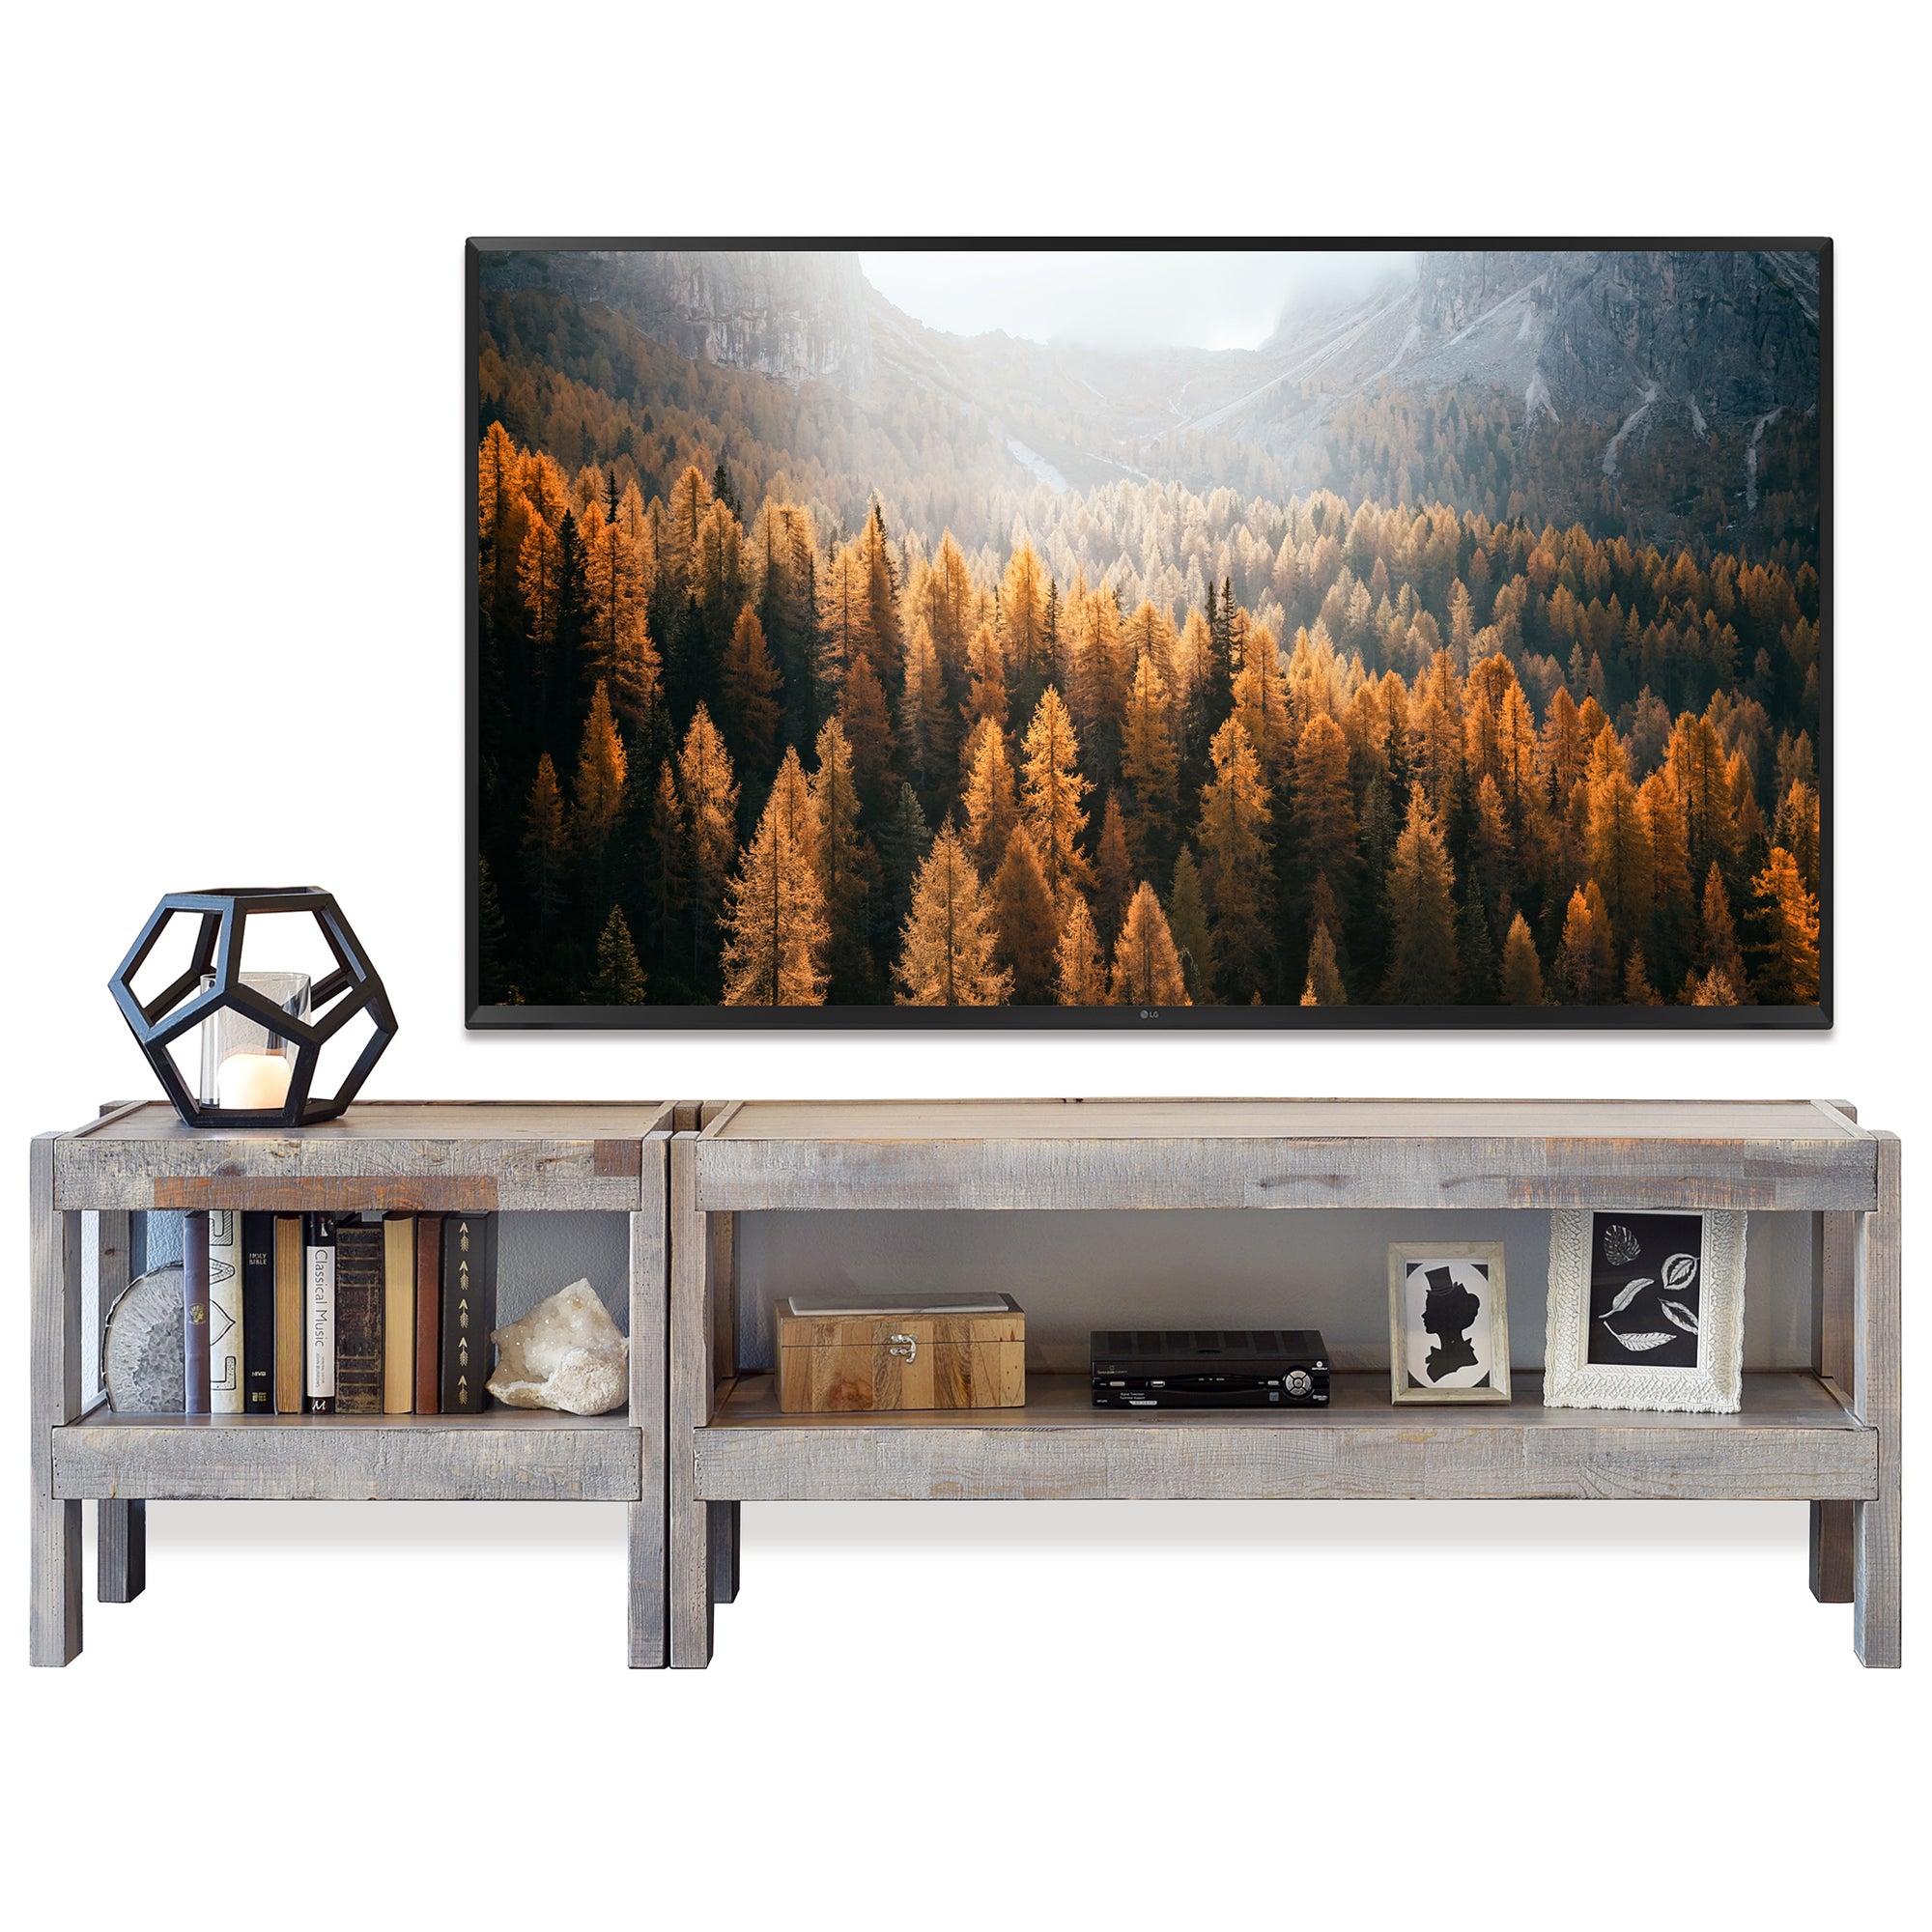 Gray Rustic Wood Reclaimed TV Stand Entertainment Center Console - presEARTH Lakewood